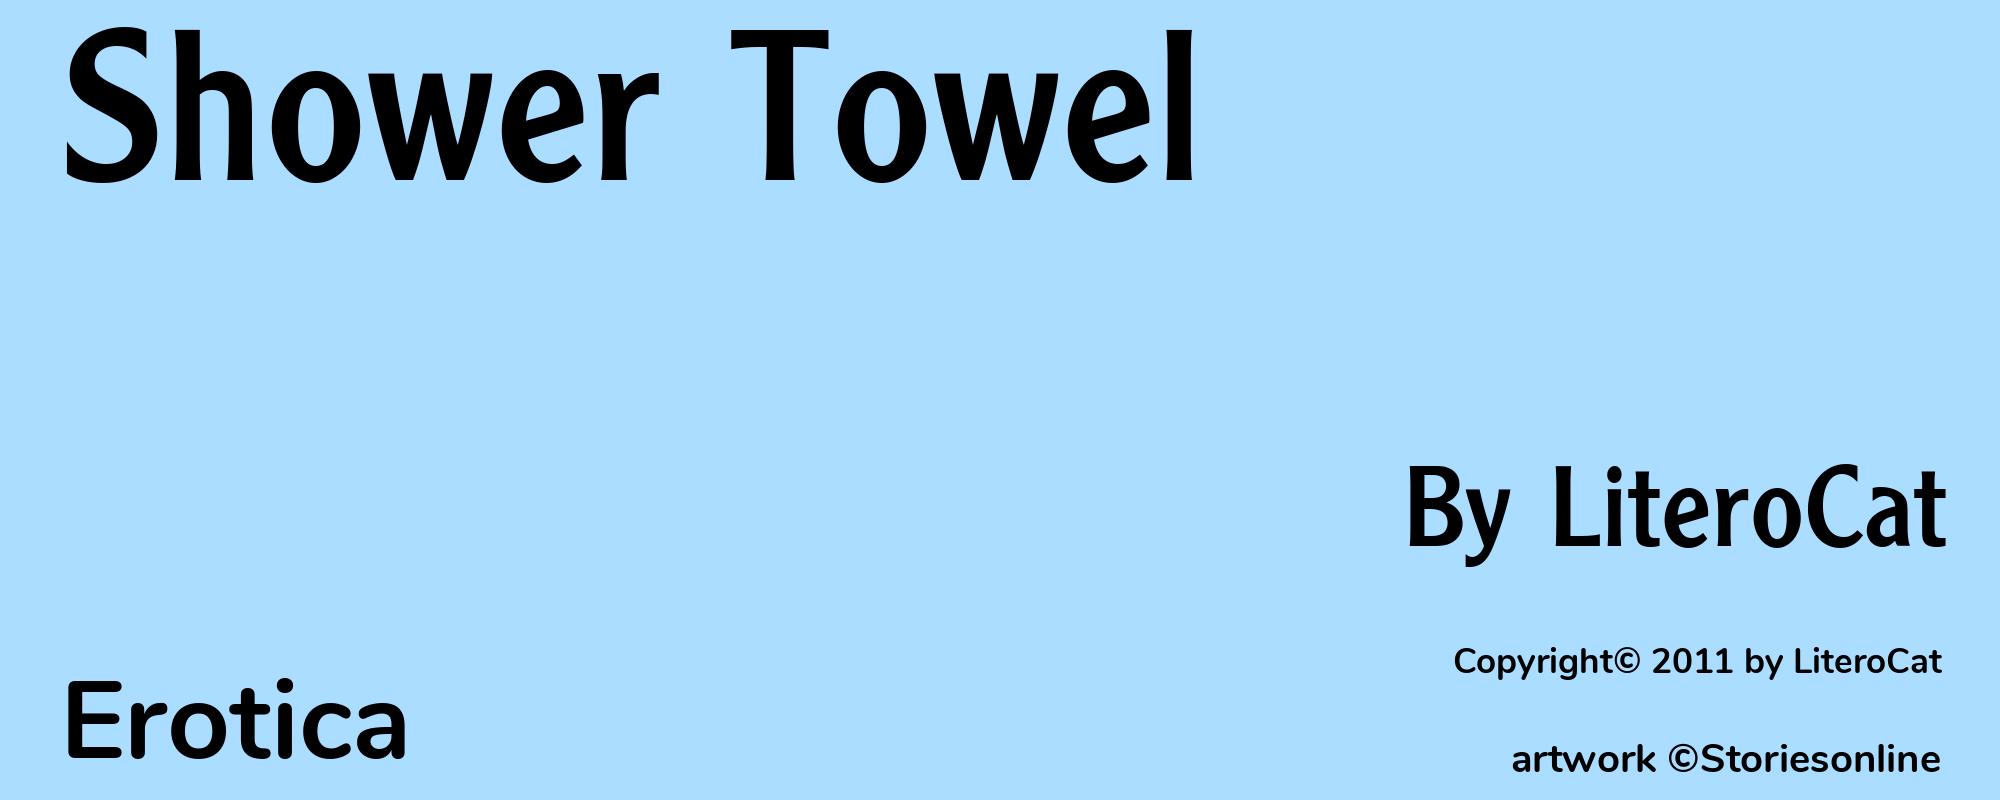 Shower Towel - Cover